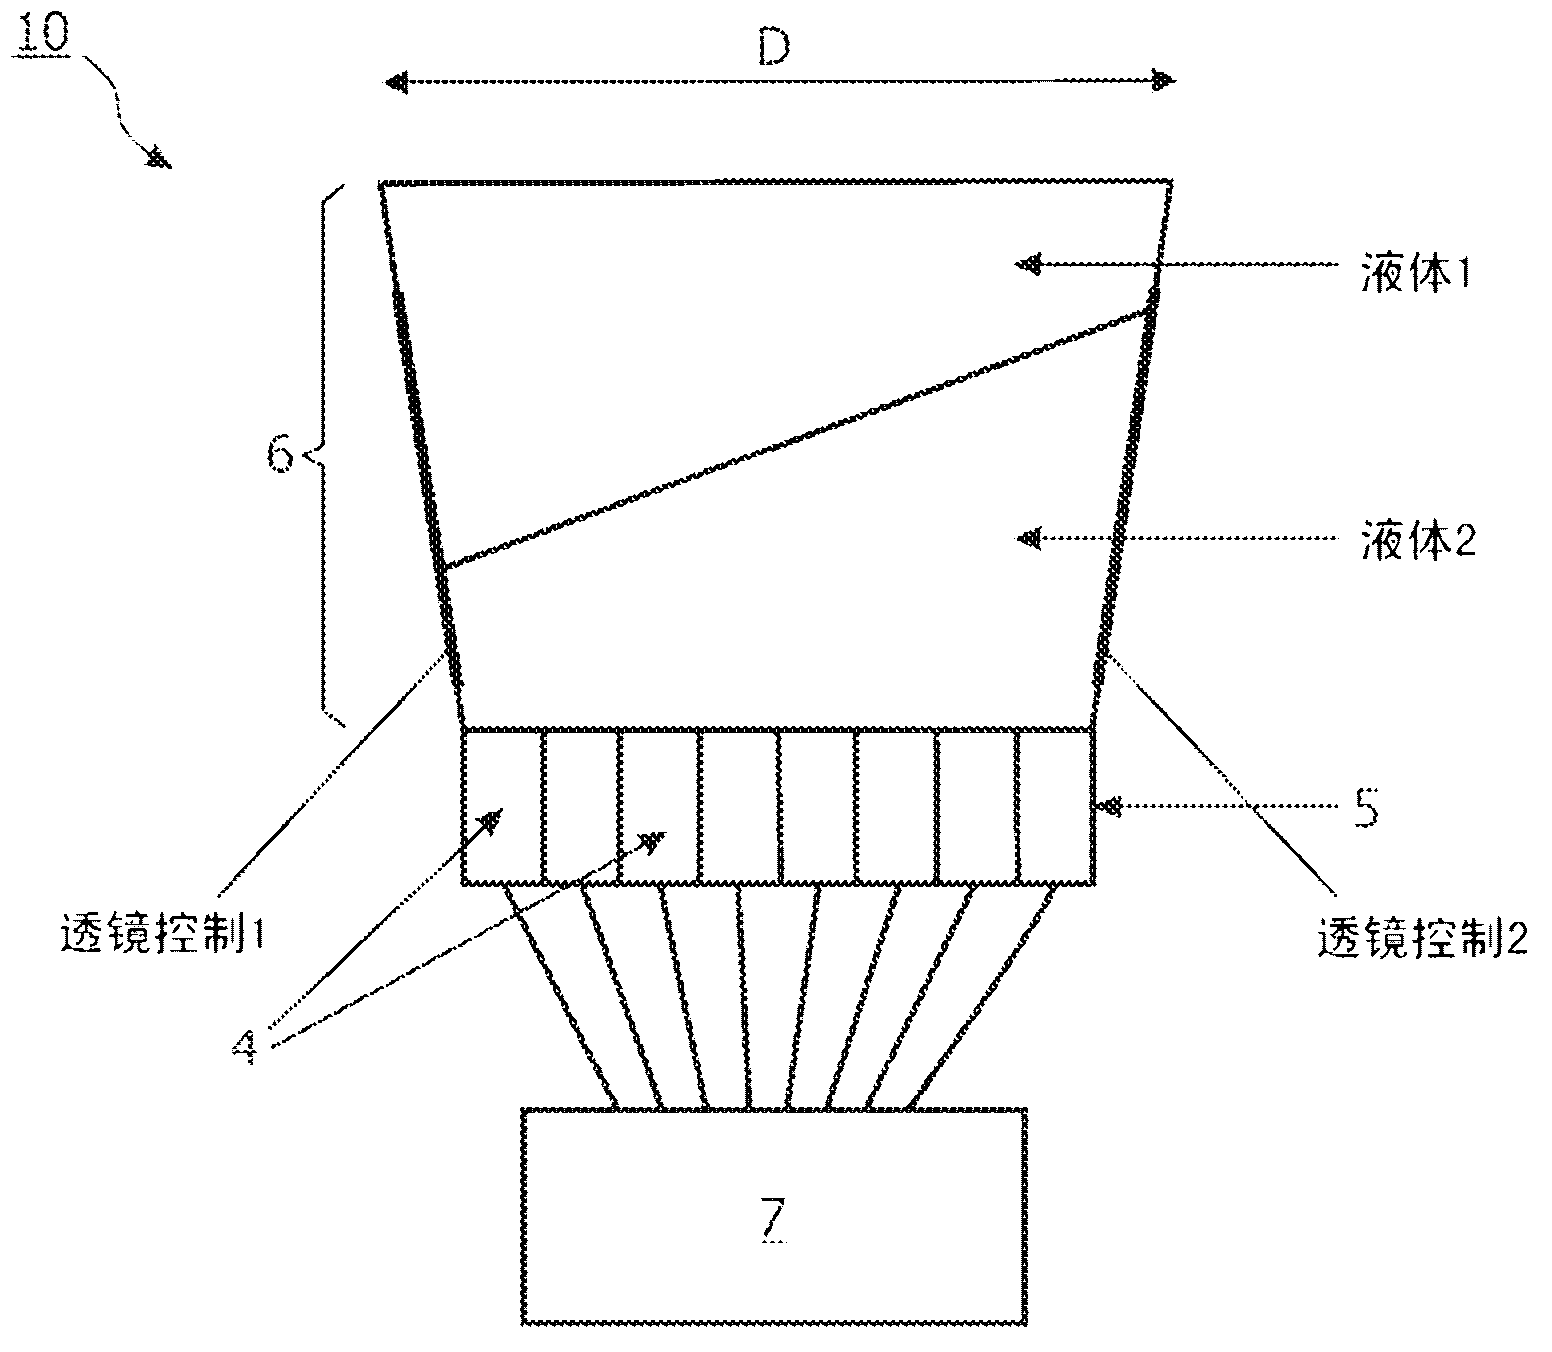 Ultrasonic imaging with a variable refractive lens